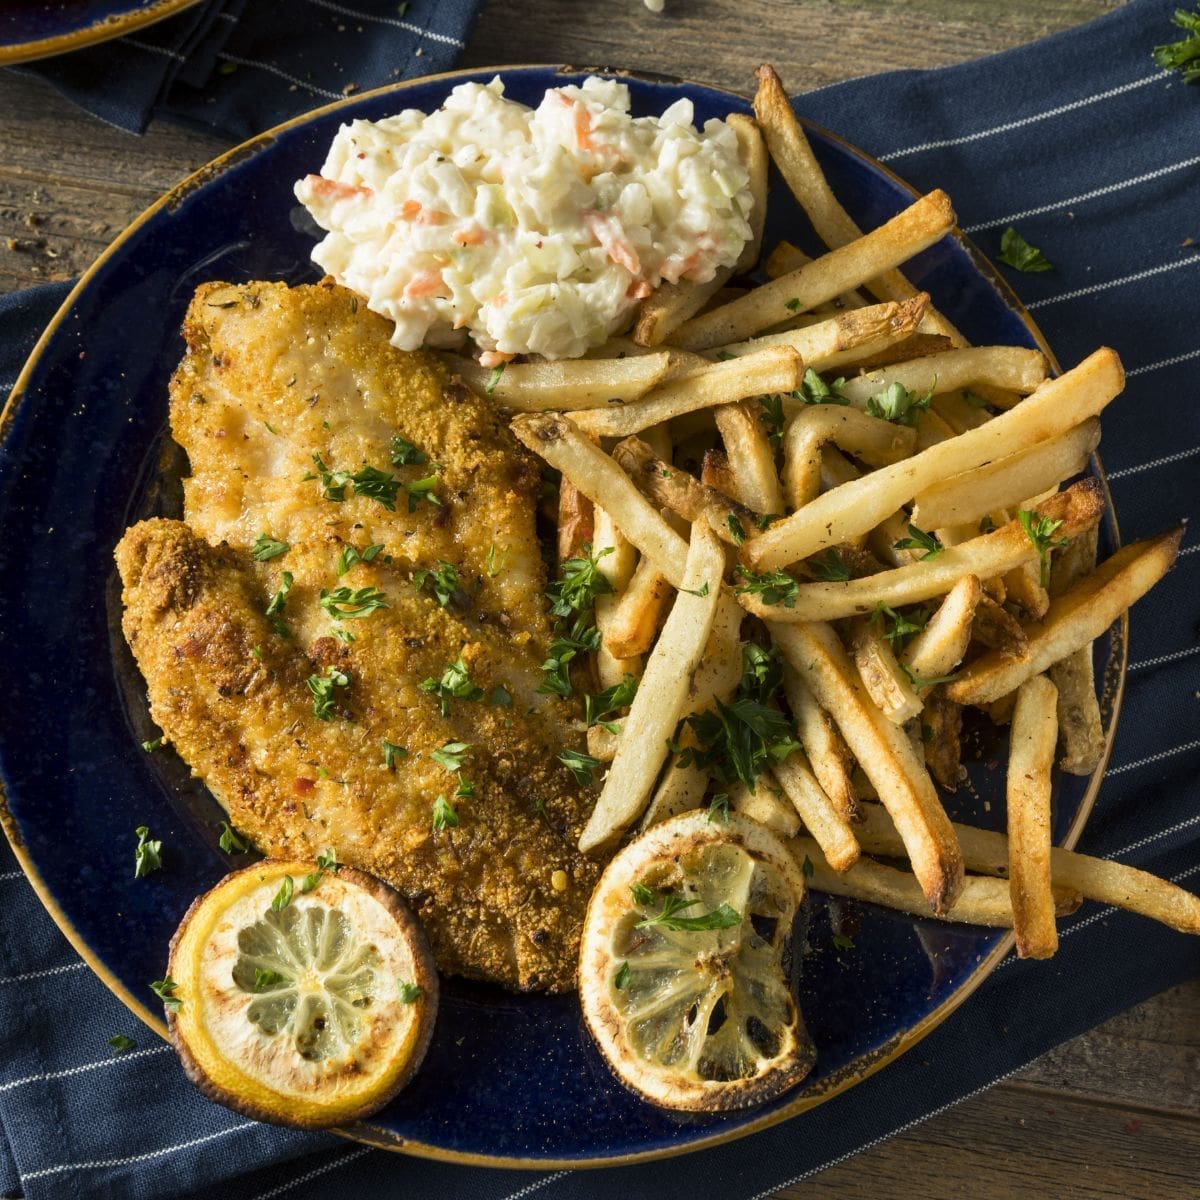 What To Serve With Fried Catfish: 42 Best Side Dishes